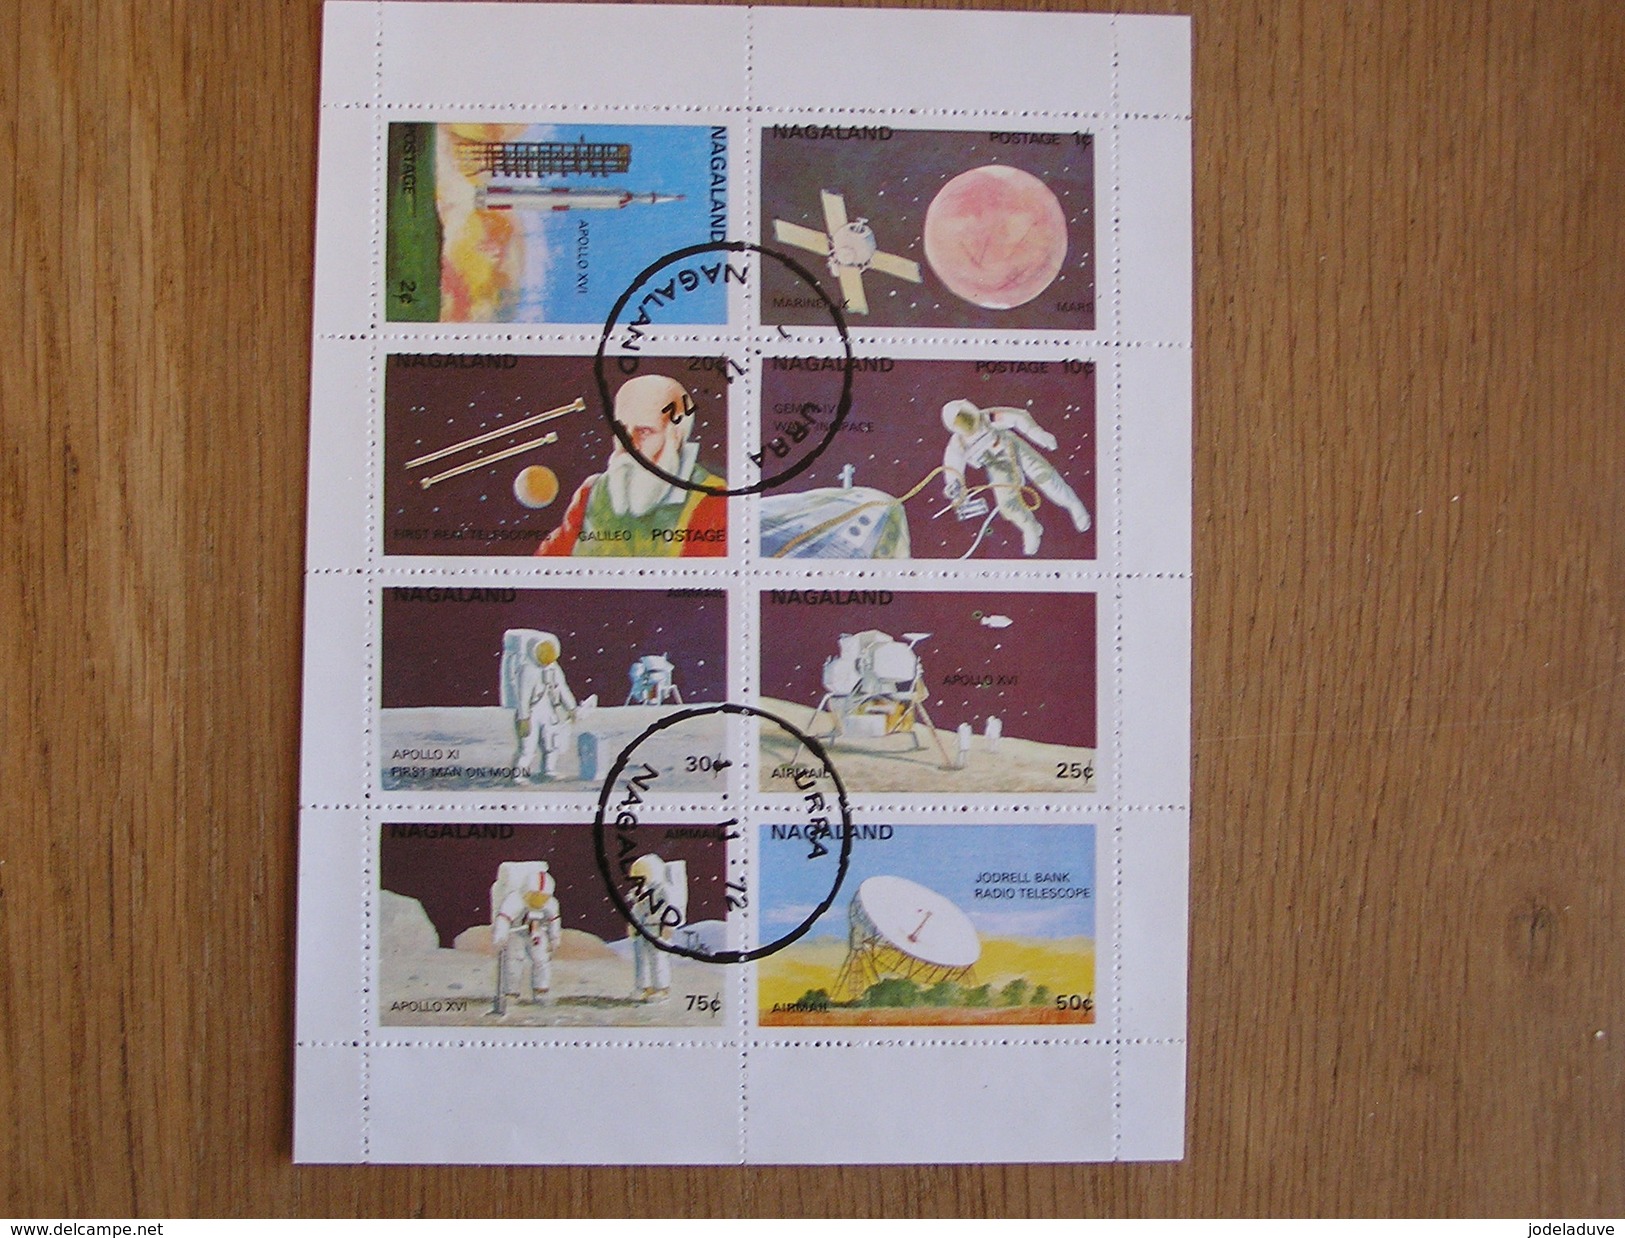 NAGALAND  Espace Space Astronautique Engin Spatial Apollo Lune Sheet Stamp Bloc Timbres - Andere-Azië